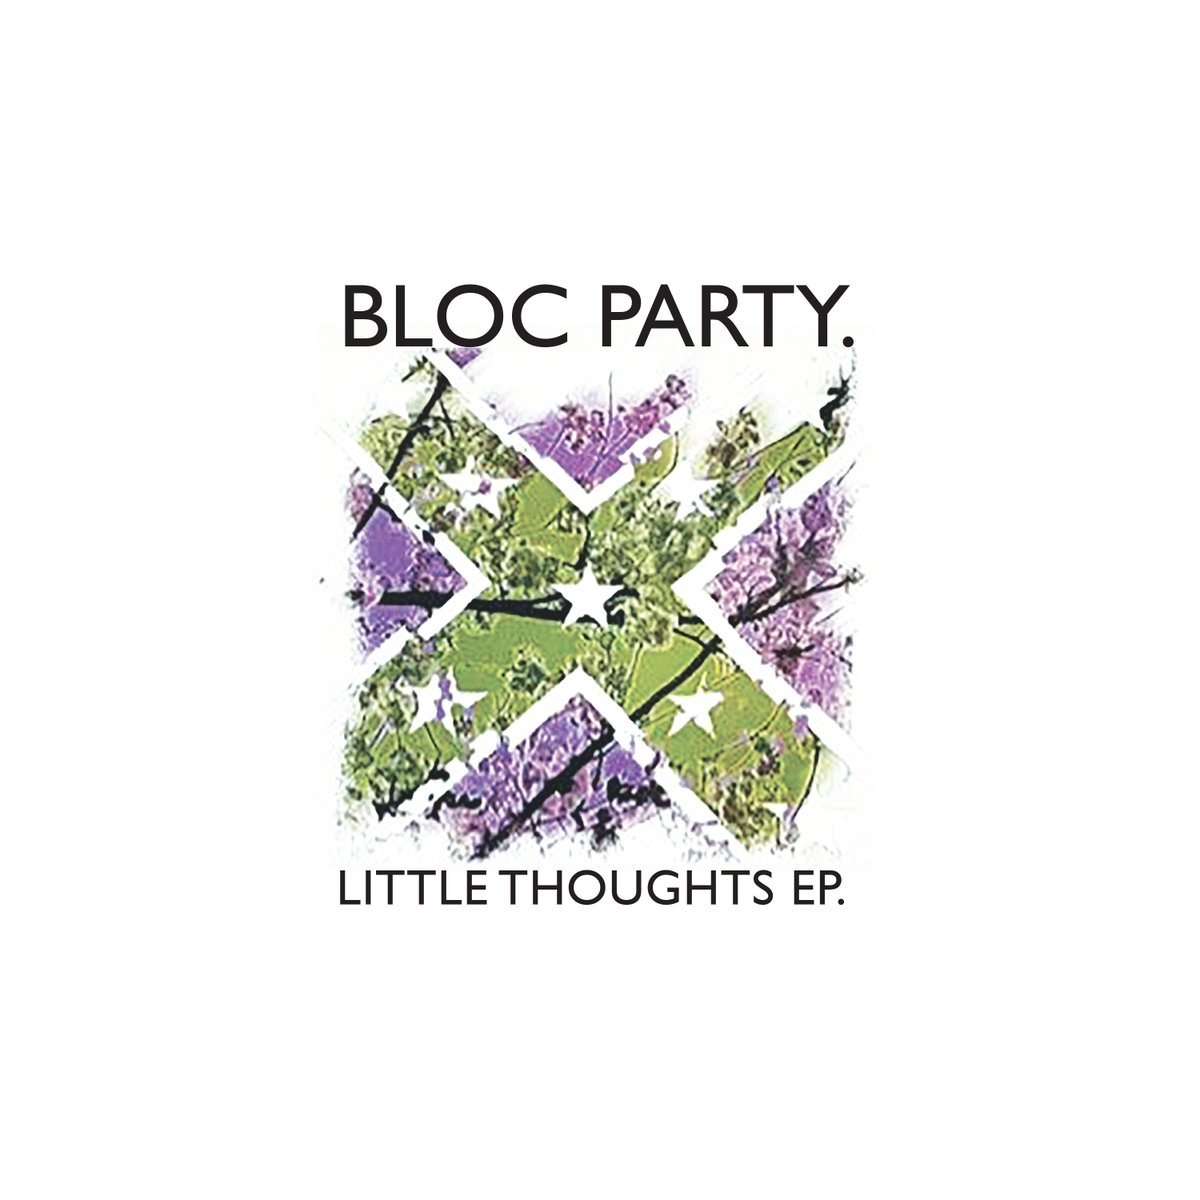 From next week, you'll be able to stream the Little Thoughts EP for the first time including Skeleton, Tulips, Storm and Stress and more - sign up for the mailing list now at blocparty.com to get the link first